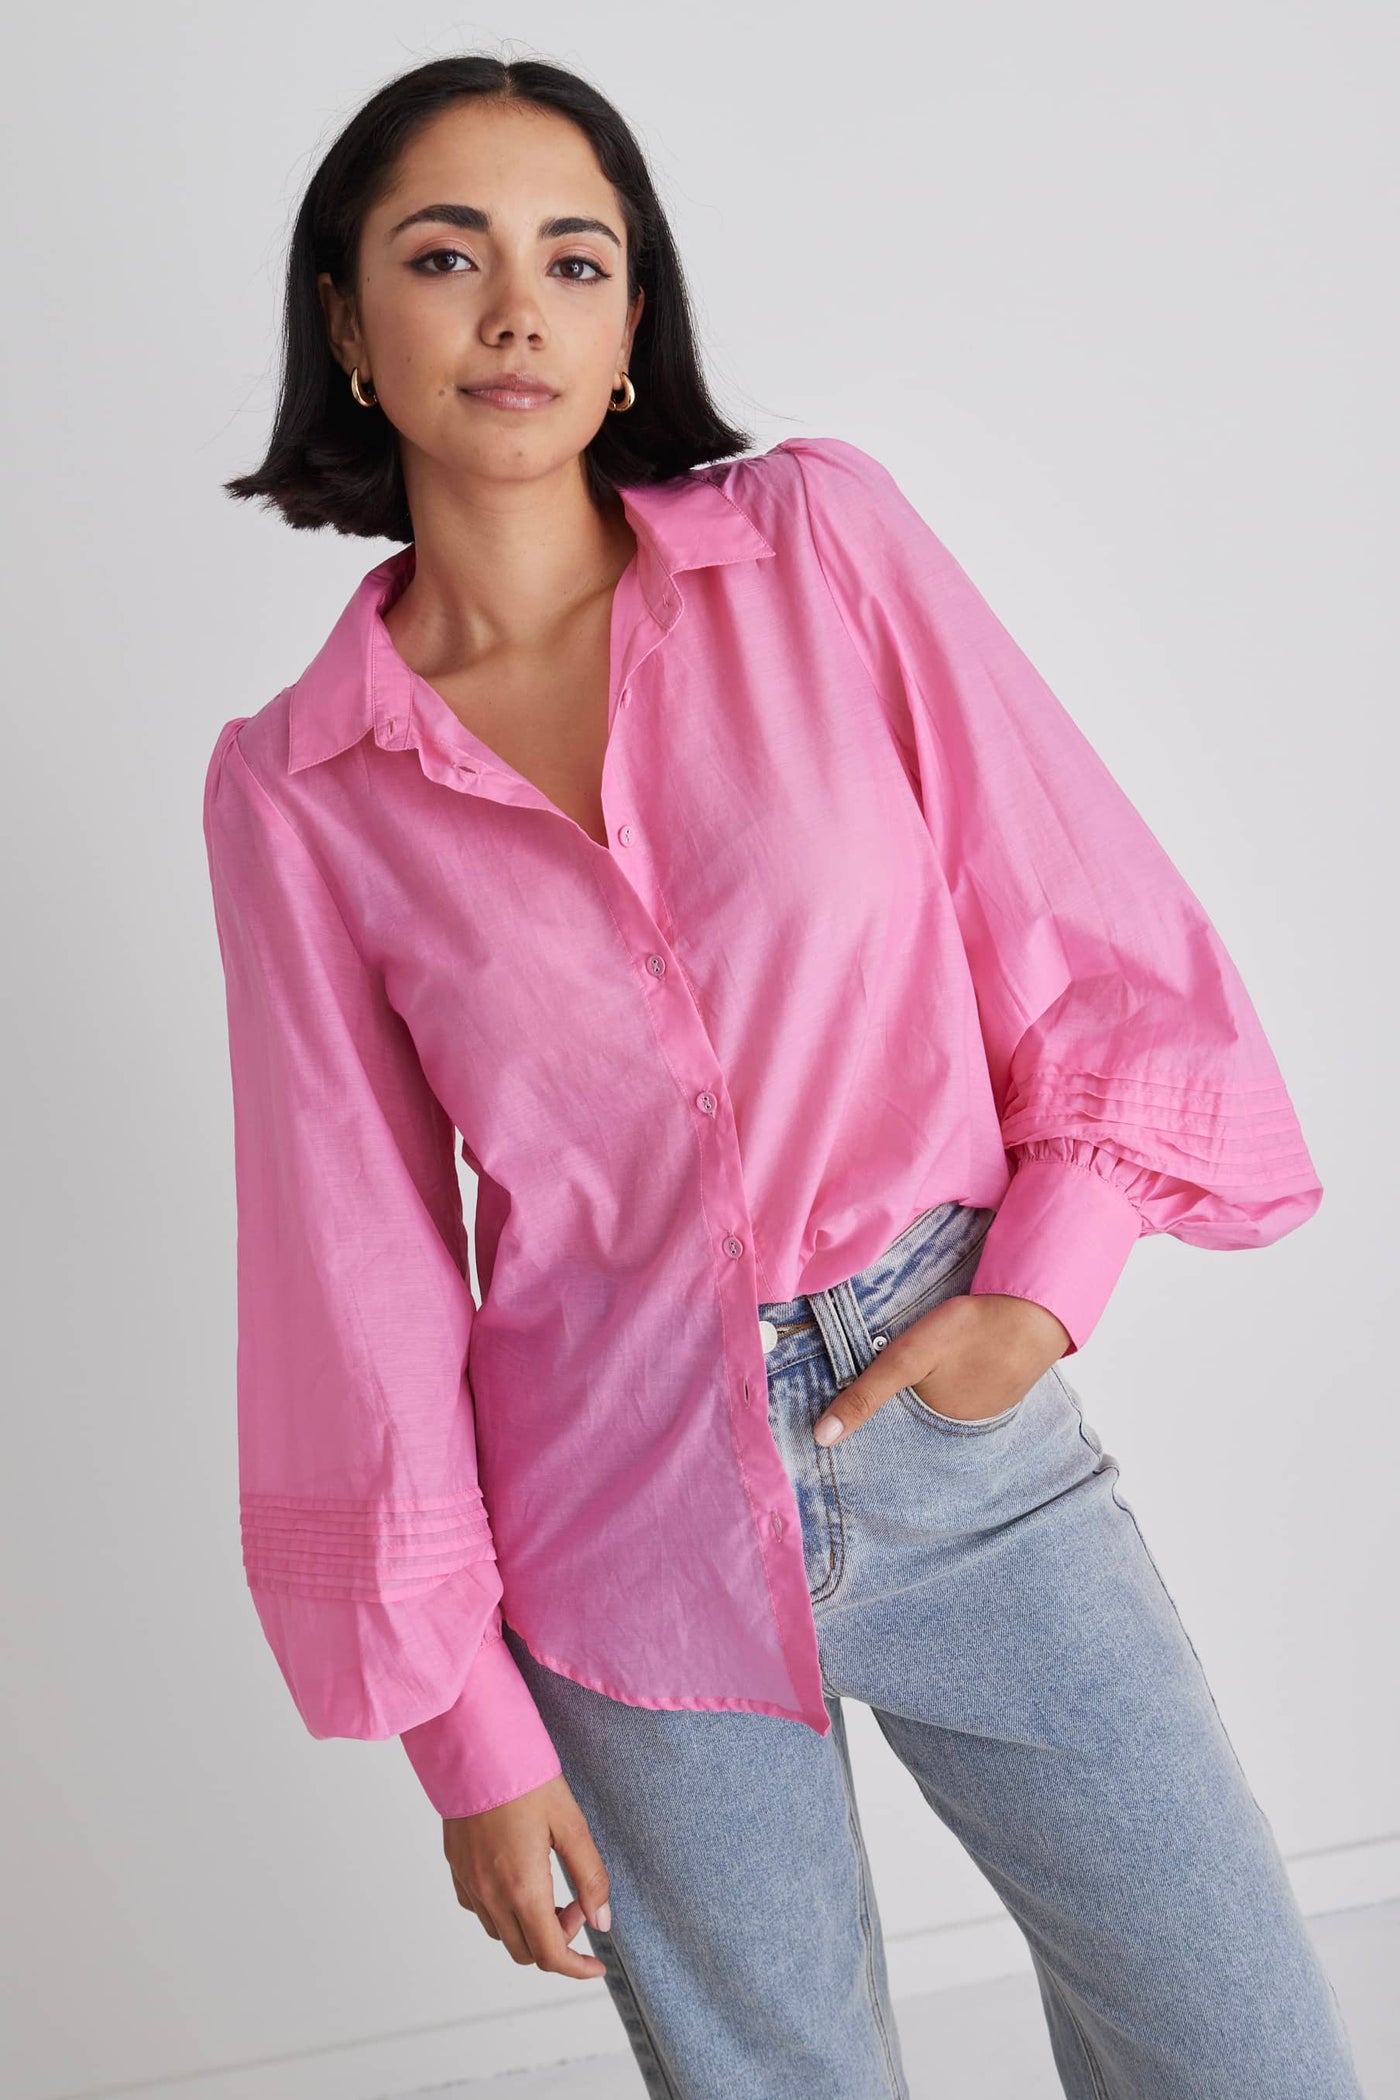 Stories Be Told Savvy Sheer Puff Sleeve Shirt - Bubblegum Pink The Stories Be Told Savvy Shirt, a captivating and bold addition to your wardrobe. This shirt combines the delicate allure of sheer fabric with a vibrant bubblegum pink color, creating a striking and eye-catching ensemble. Team with black, white or denim bottoms for an simple outfit.      Button up front       Puff Sleeve       Button Cuffs      Slightly Sheer     30% Tencel, 70% Cotton